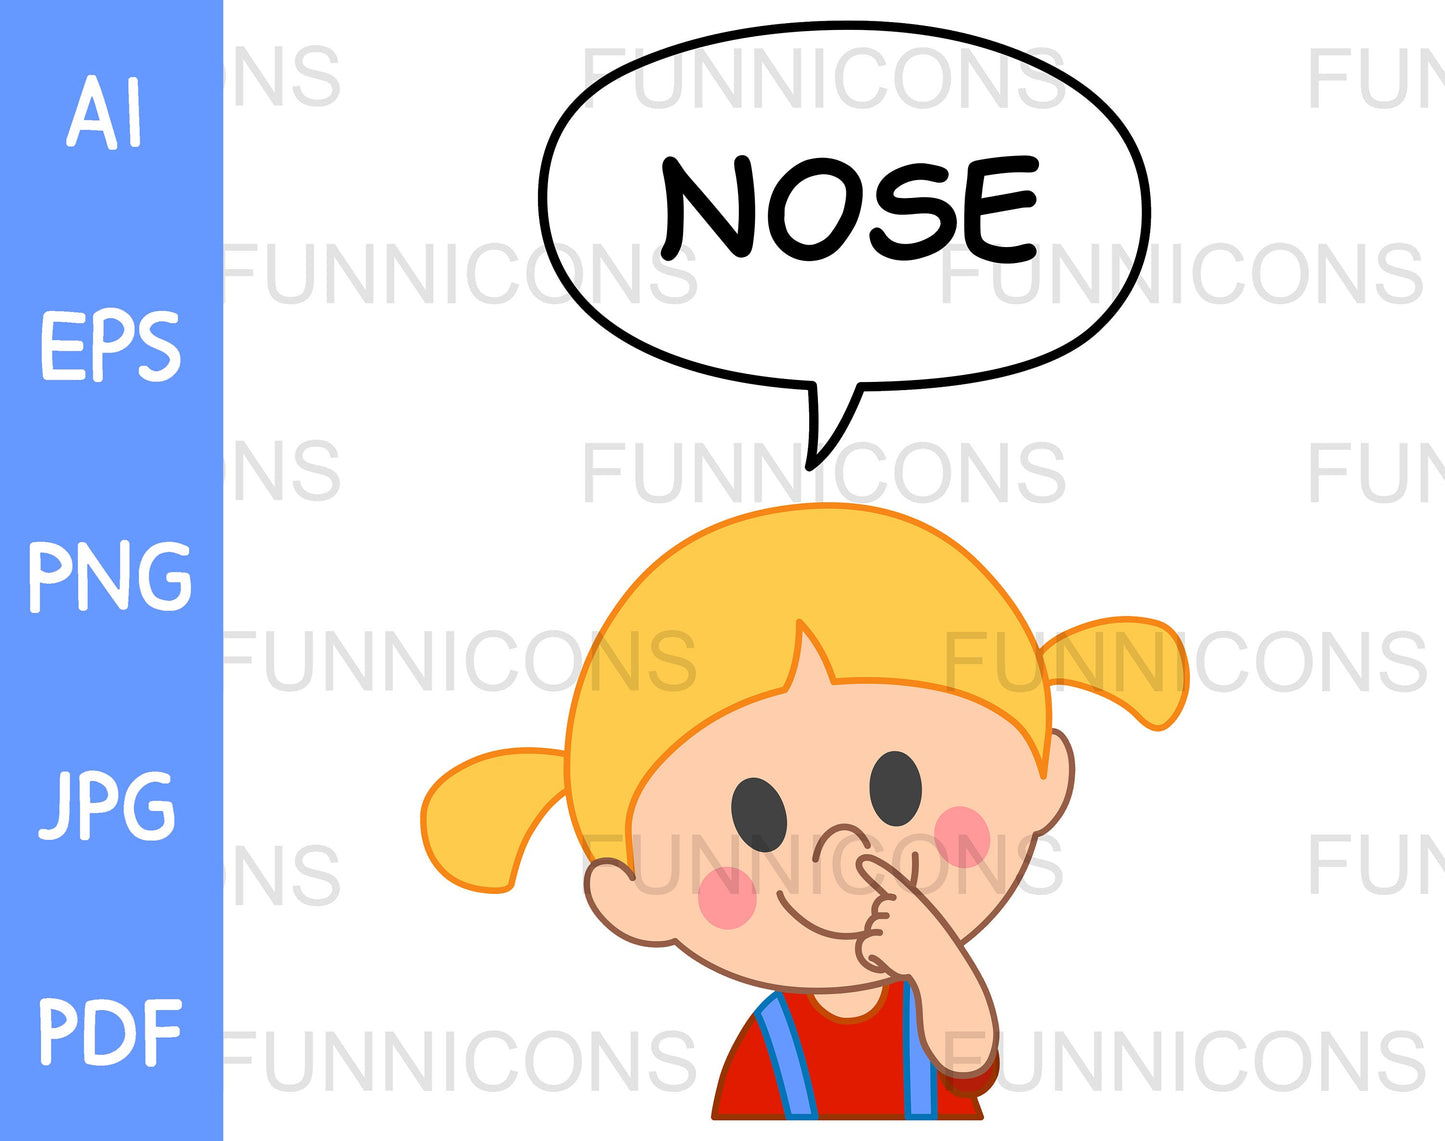 Young Girl Pointing to and Saying Nose in a Speech Bubble